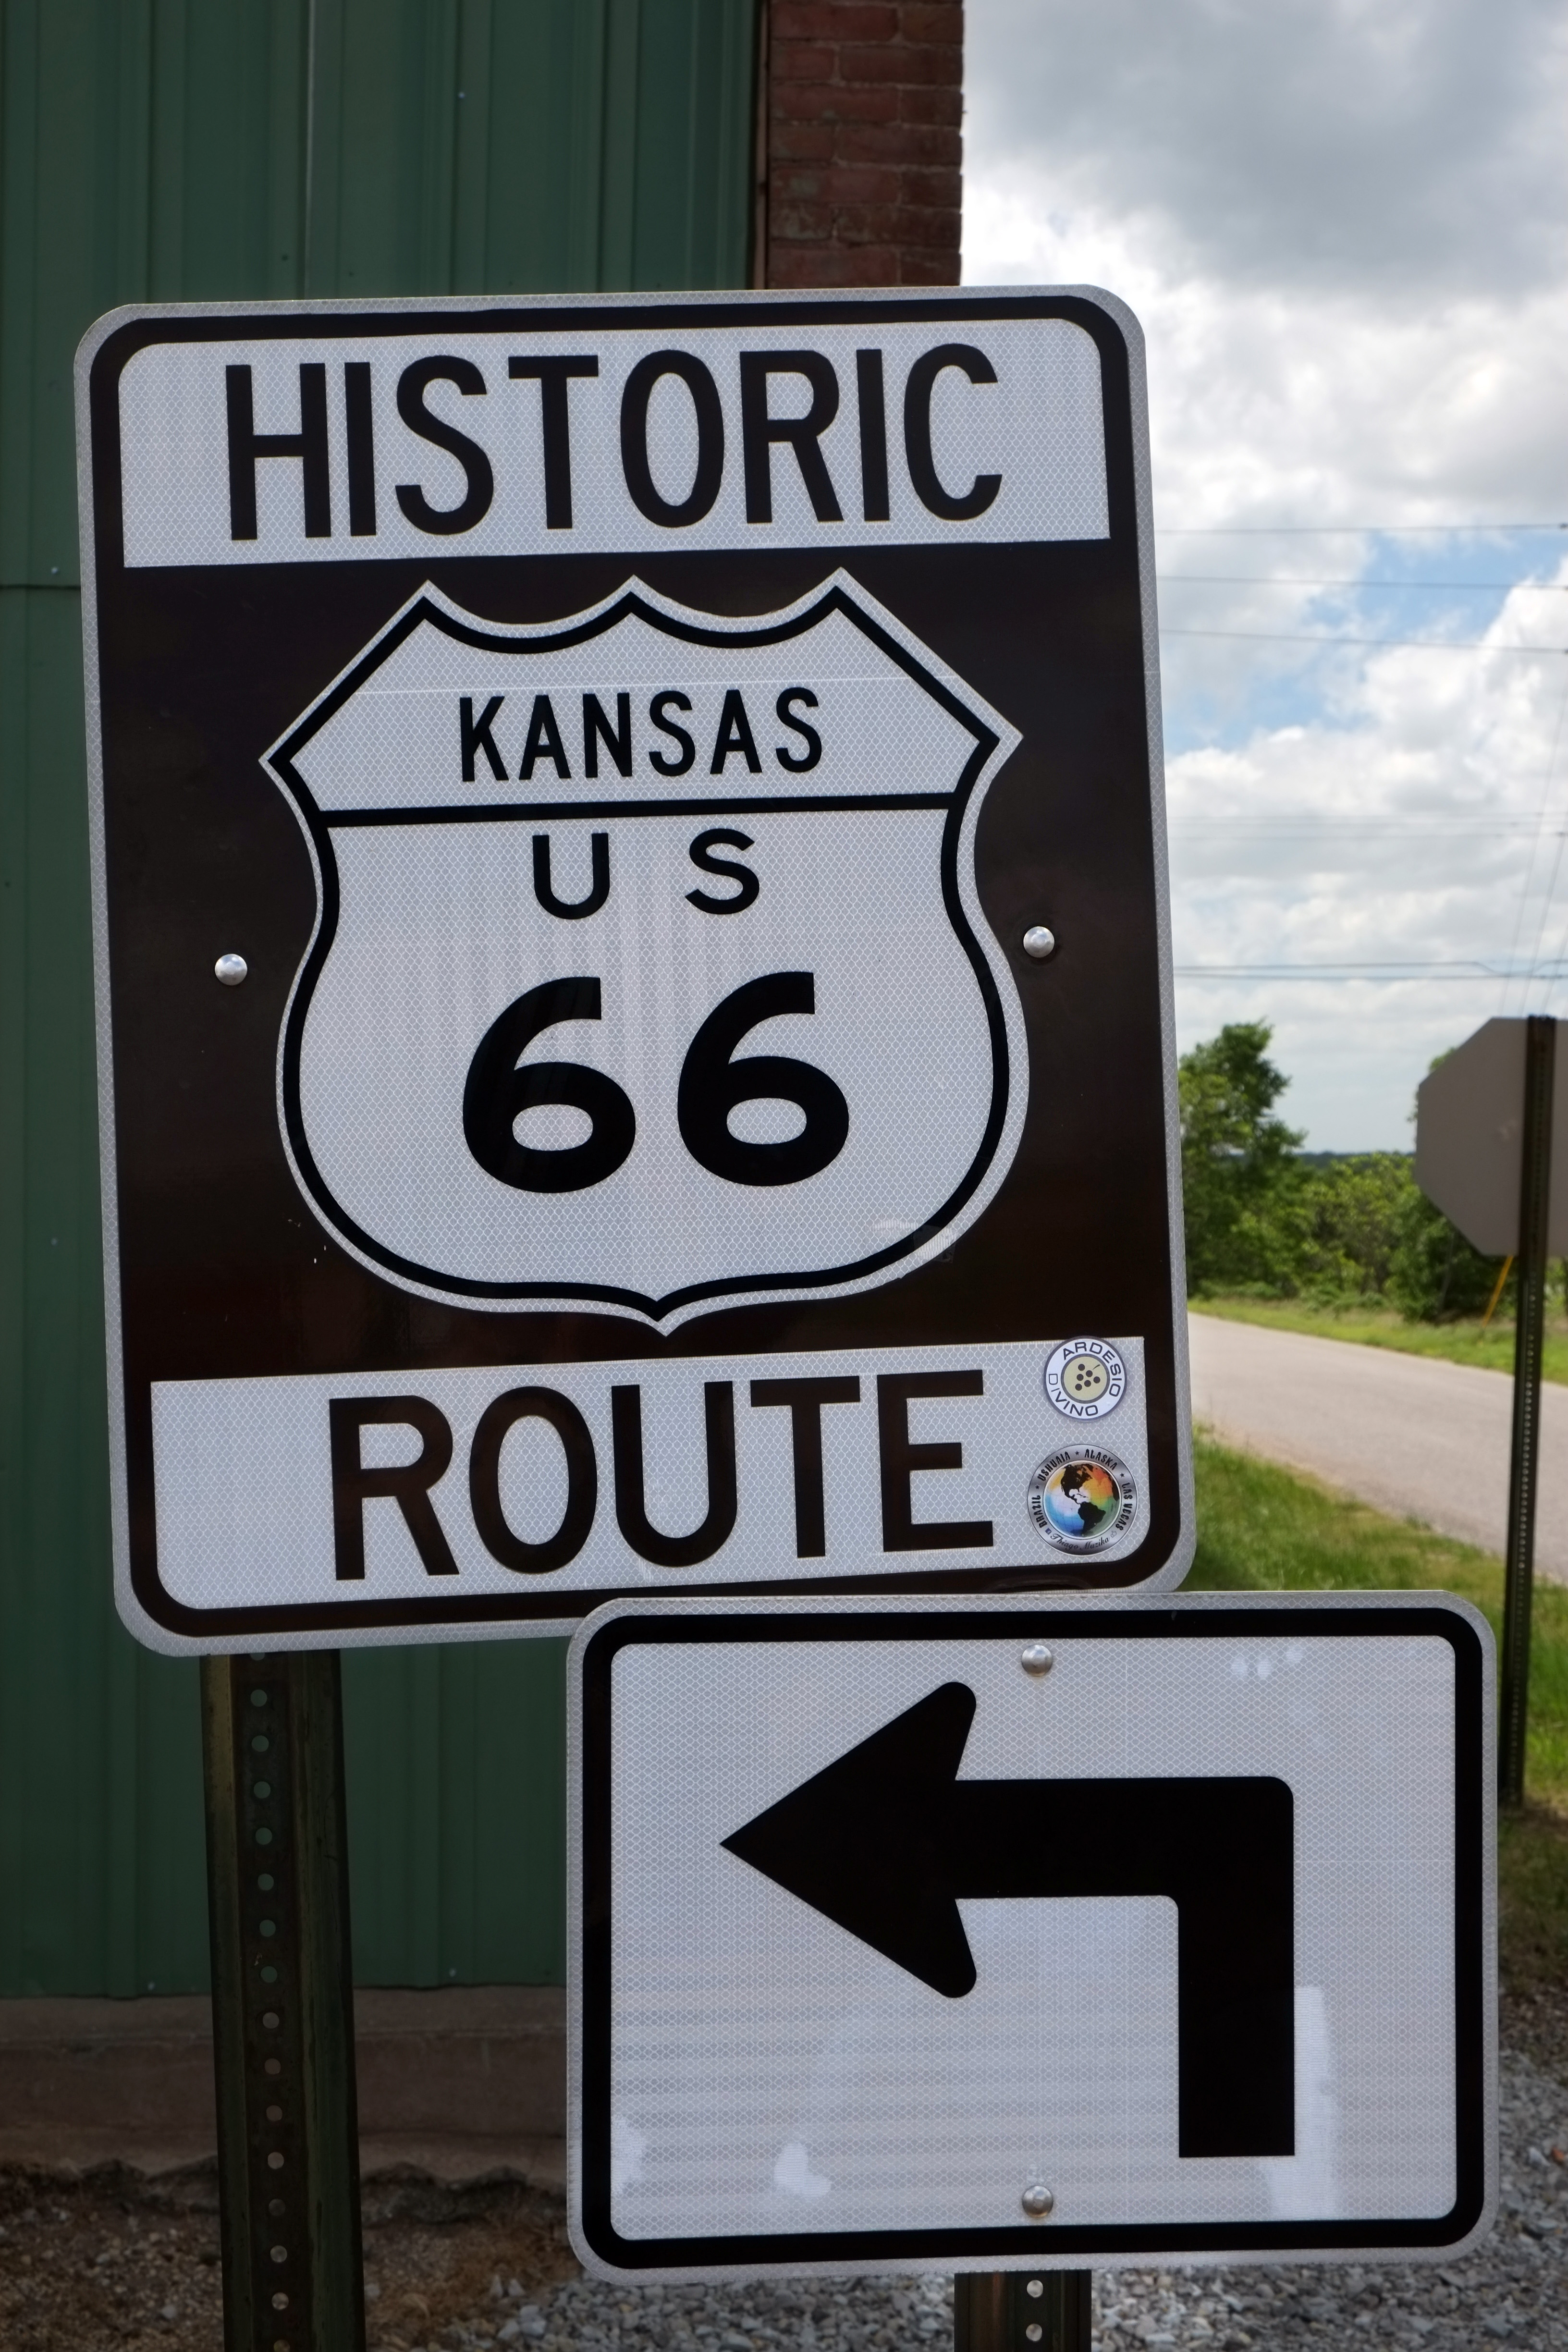 2. Before 1926: The Origins of Route 66 (U.S. National Park Service)